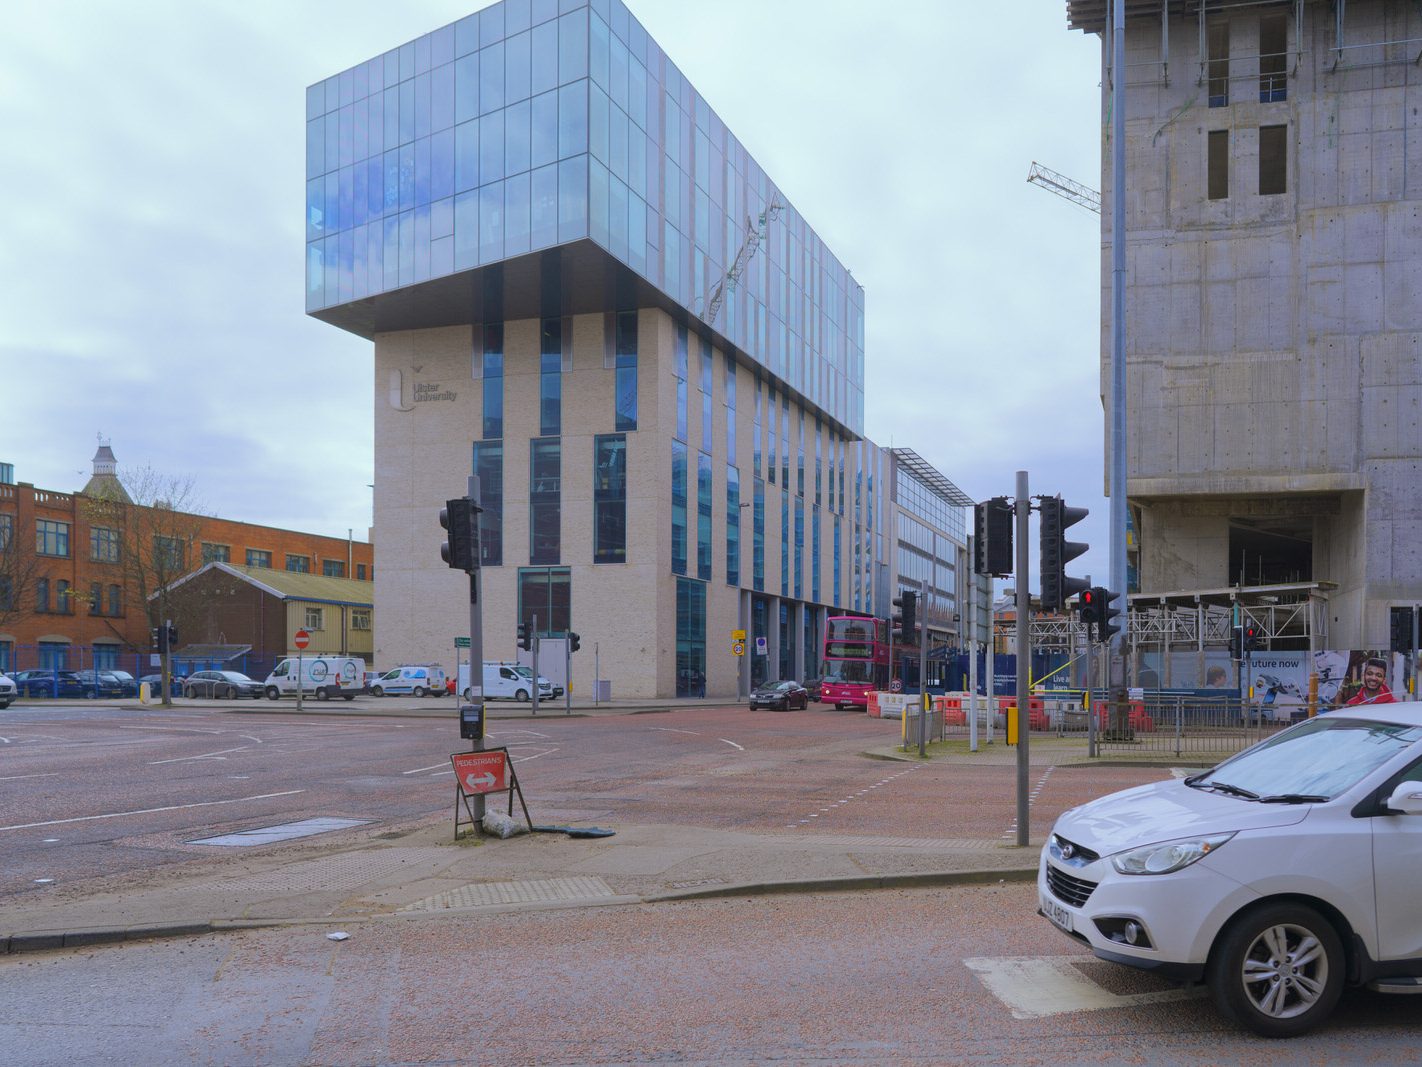 NEW ULSTER UNIVERSITY CAMPUS IN BELFAST [WAS VERY MUCH A WORK IN PROGRESS IN MARCH 2019]-224618-1